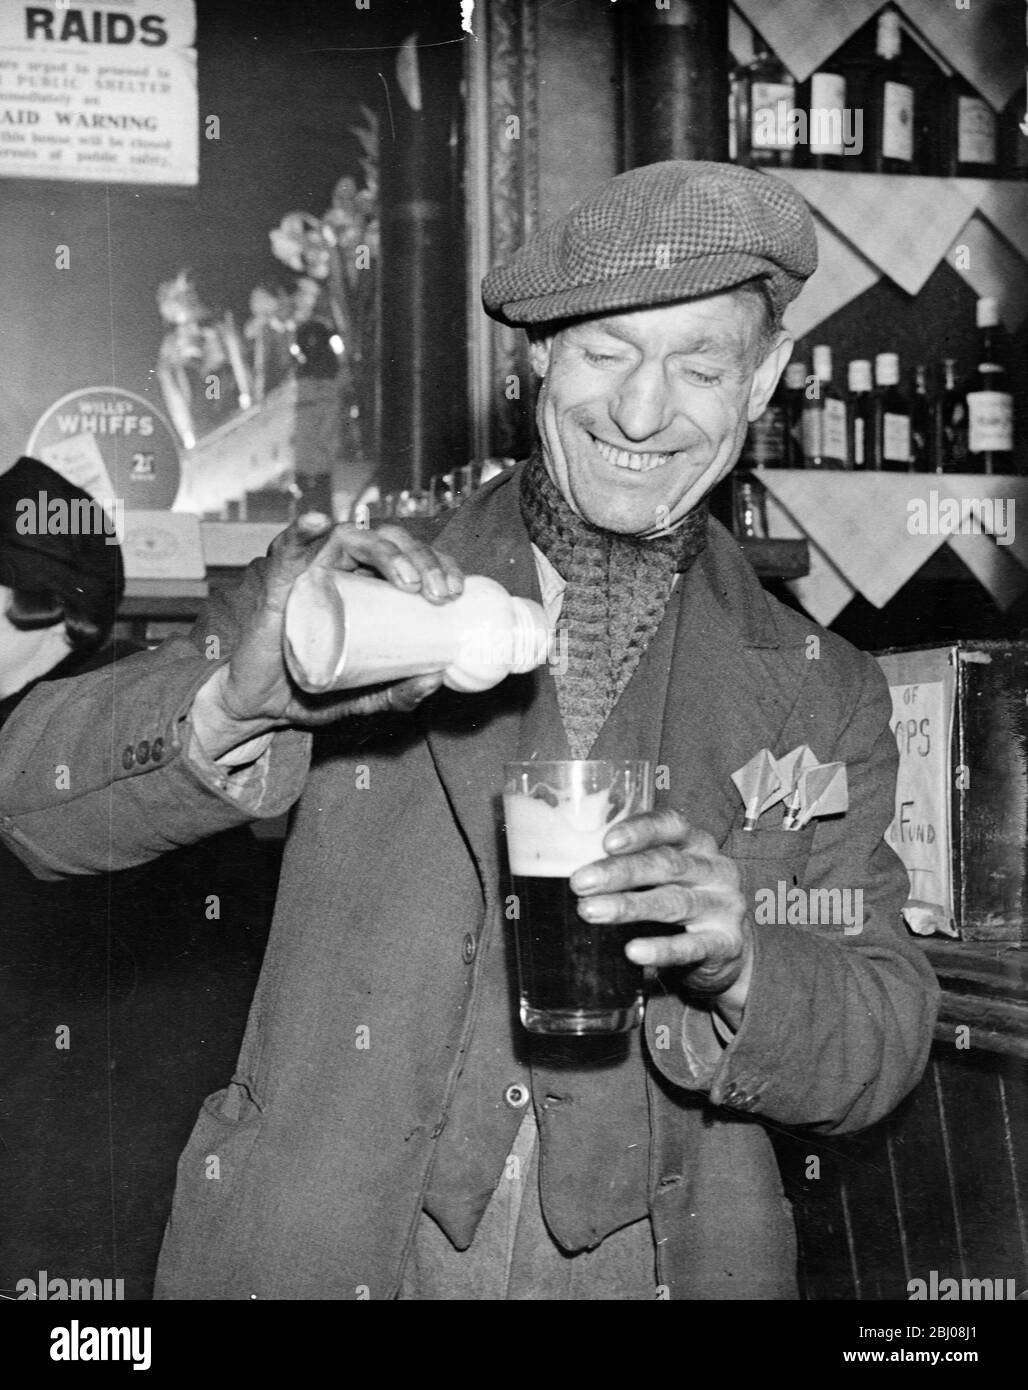 man-pours-ground-ginger-in-his-pint-of-beer-as-practised-by-stevedores-and-dockers-during-cold...jpg